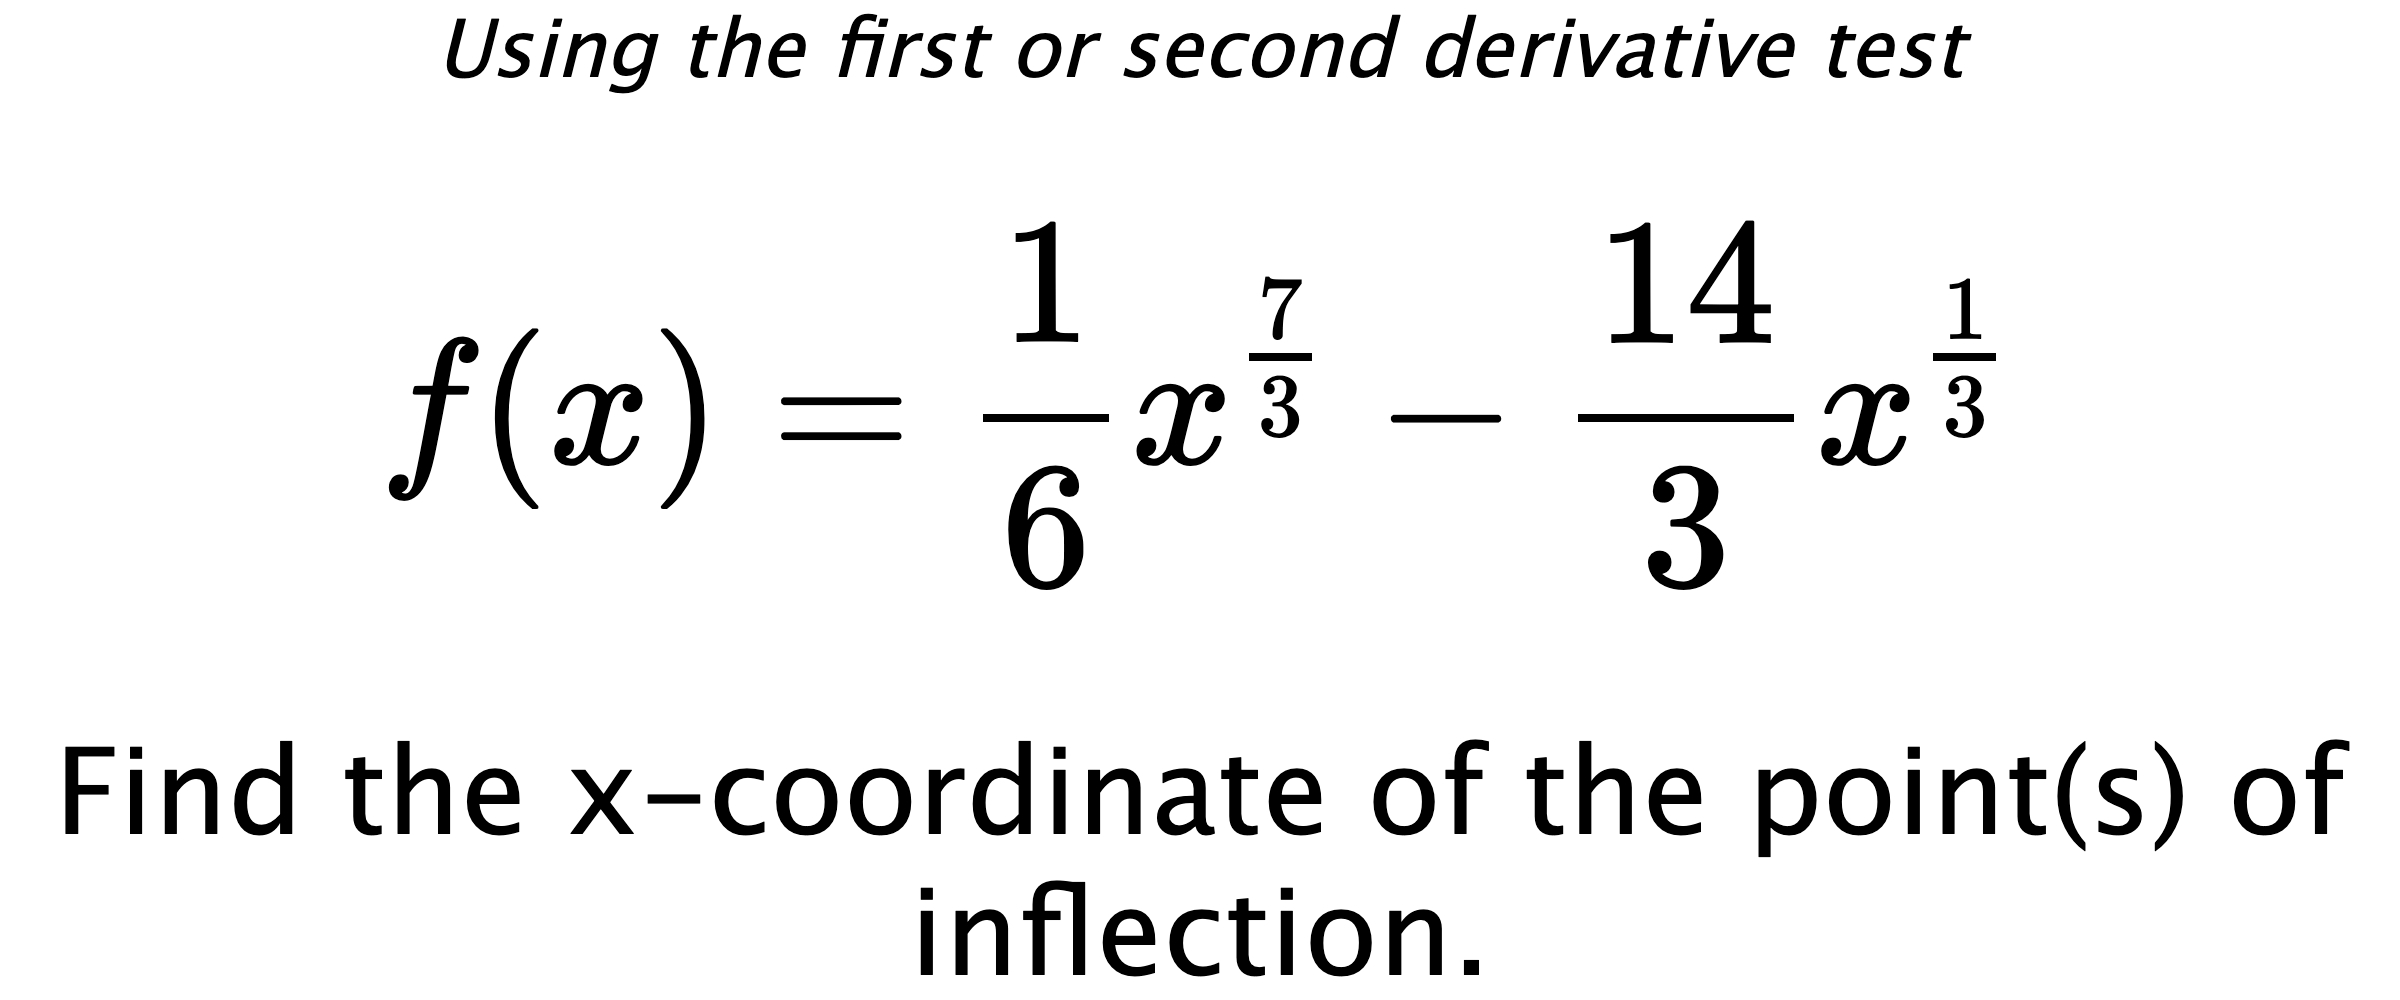 Using the first or second derivative test $$ f(x)=\frac{1}{6}x^{\frac{7}{3}}-\frac{14}{3}x^{\frac{1}{3}} $$ Find the x-coordinate of the point(s) of inflection.